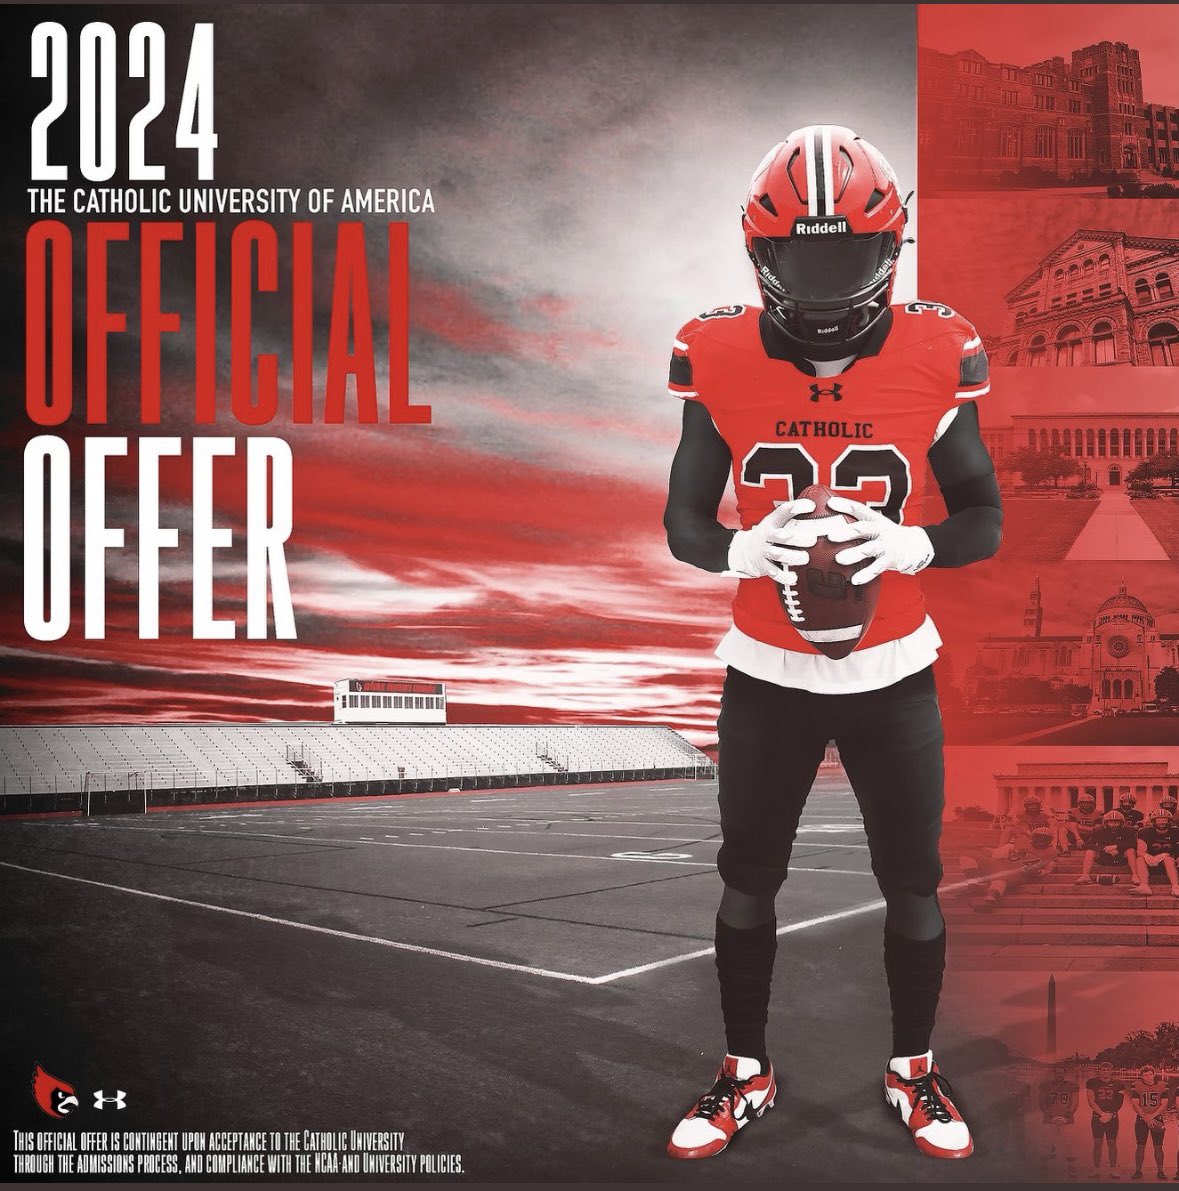 After meeting with @CoachJRut today I am excited to announce my second offer from Catholic University! @CoachStephenWCE @WCEastFootball